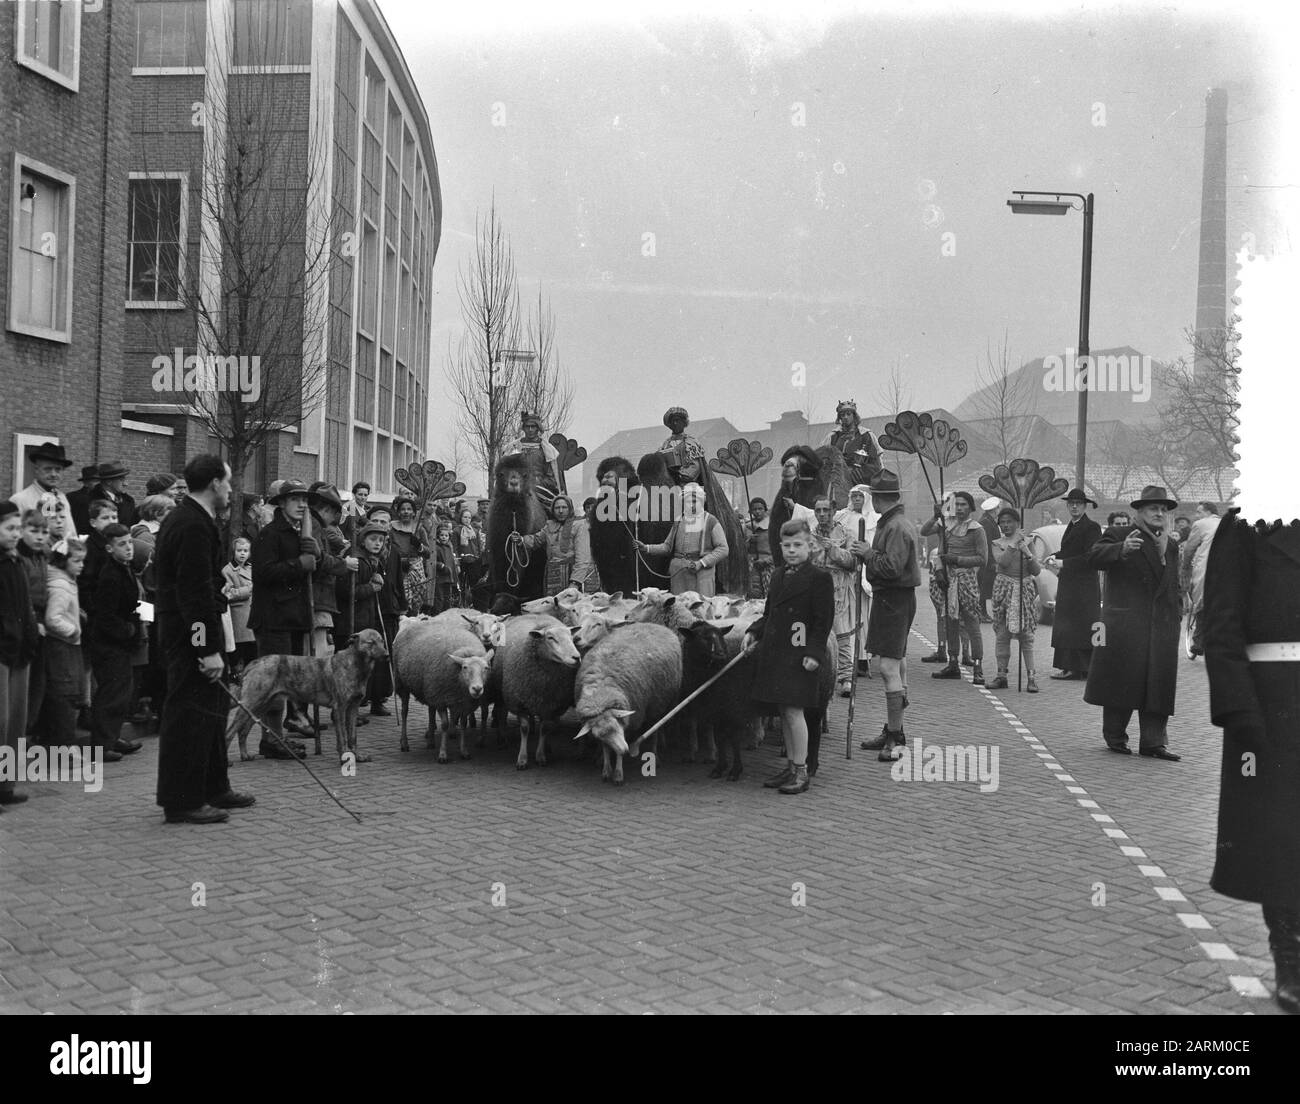 Epiphany parade in Eindhoven Date: 5 January 1956 Location: Eindhoven, Noord-Brabant Keywords: Epiphany, Parades Stock Photo